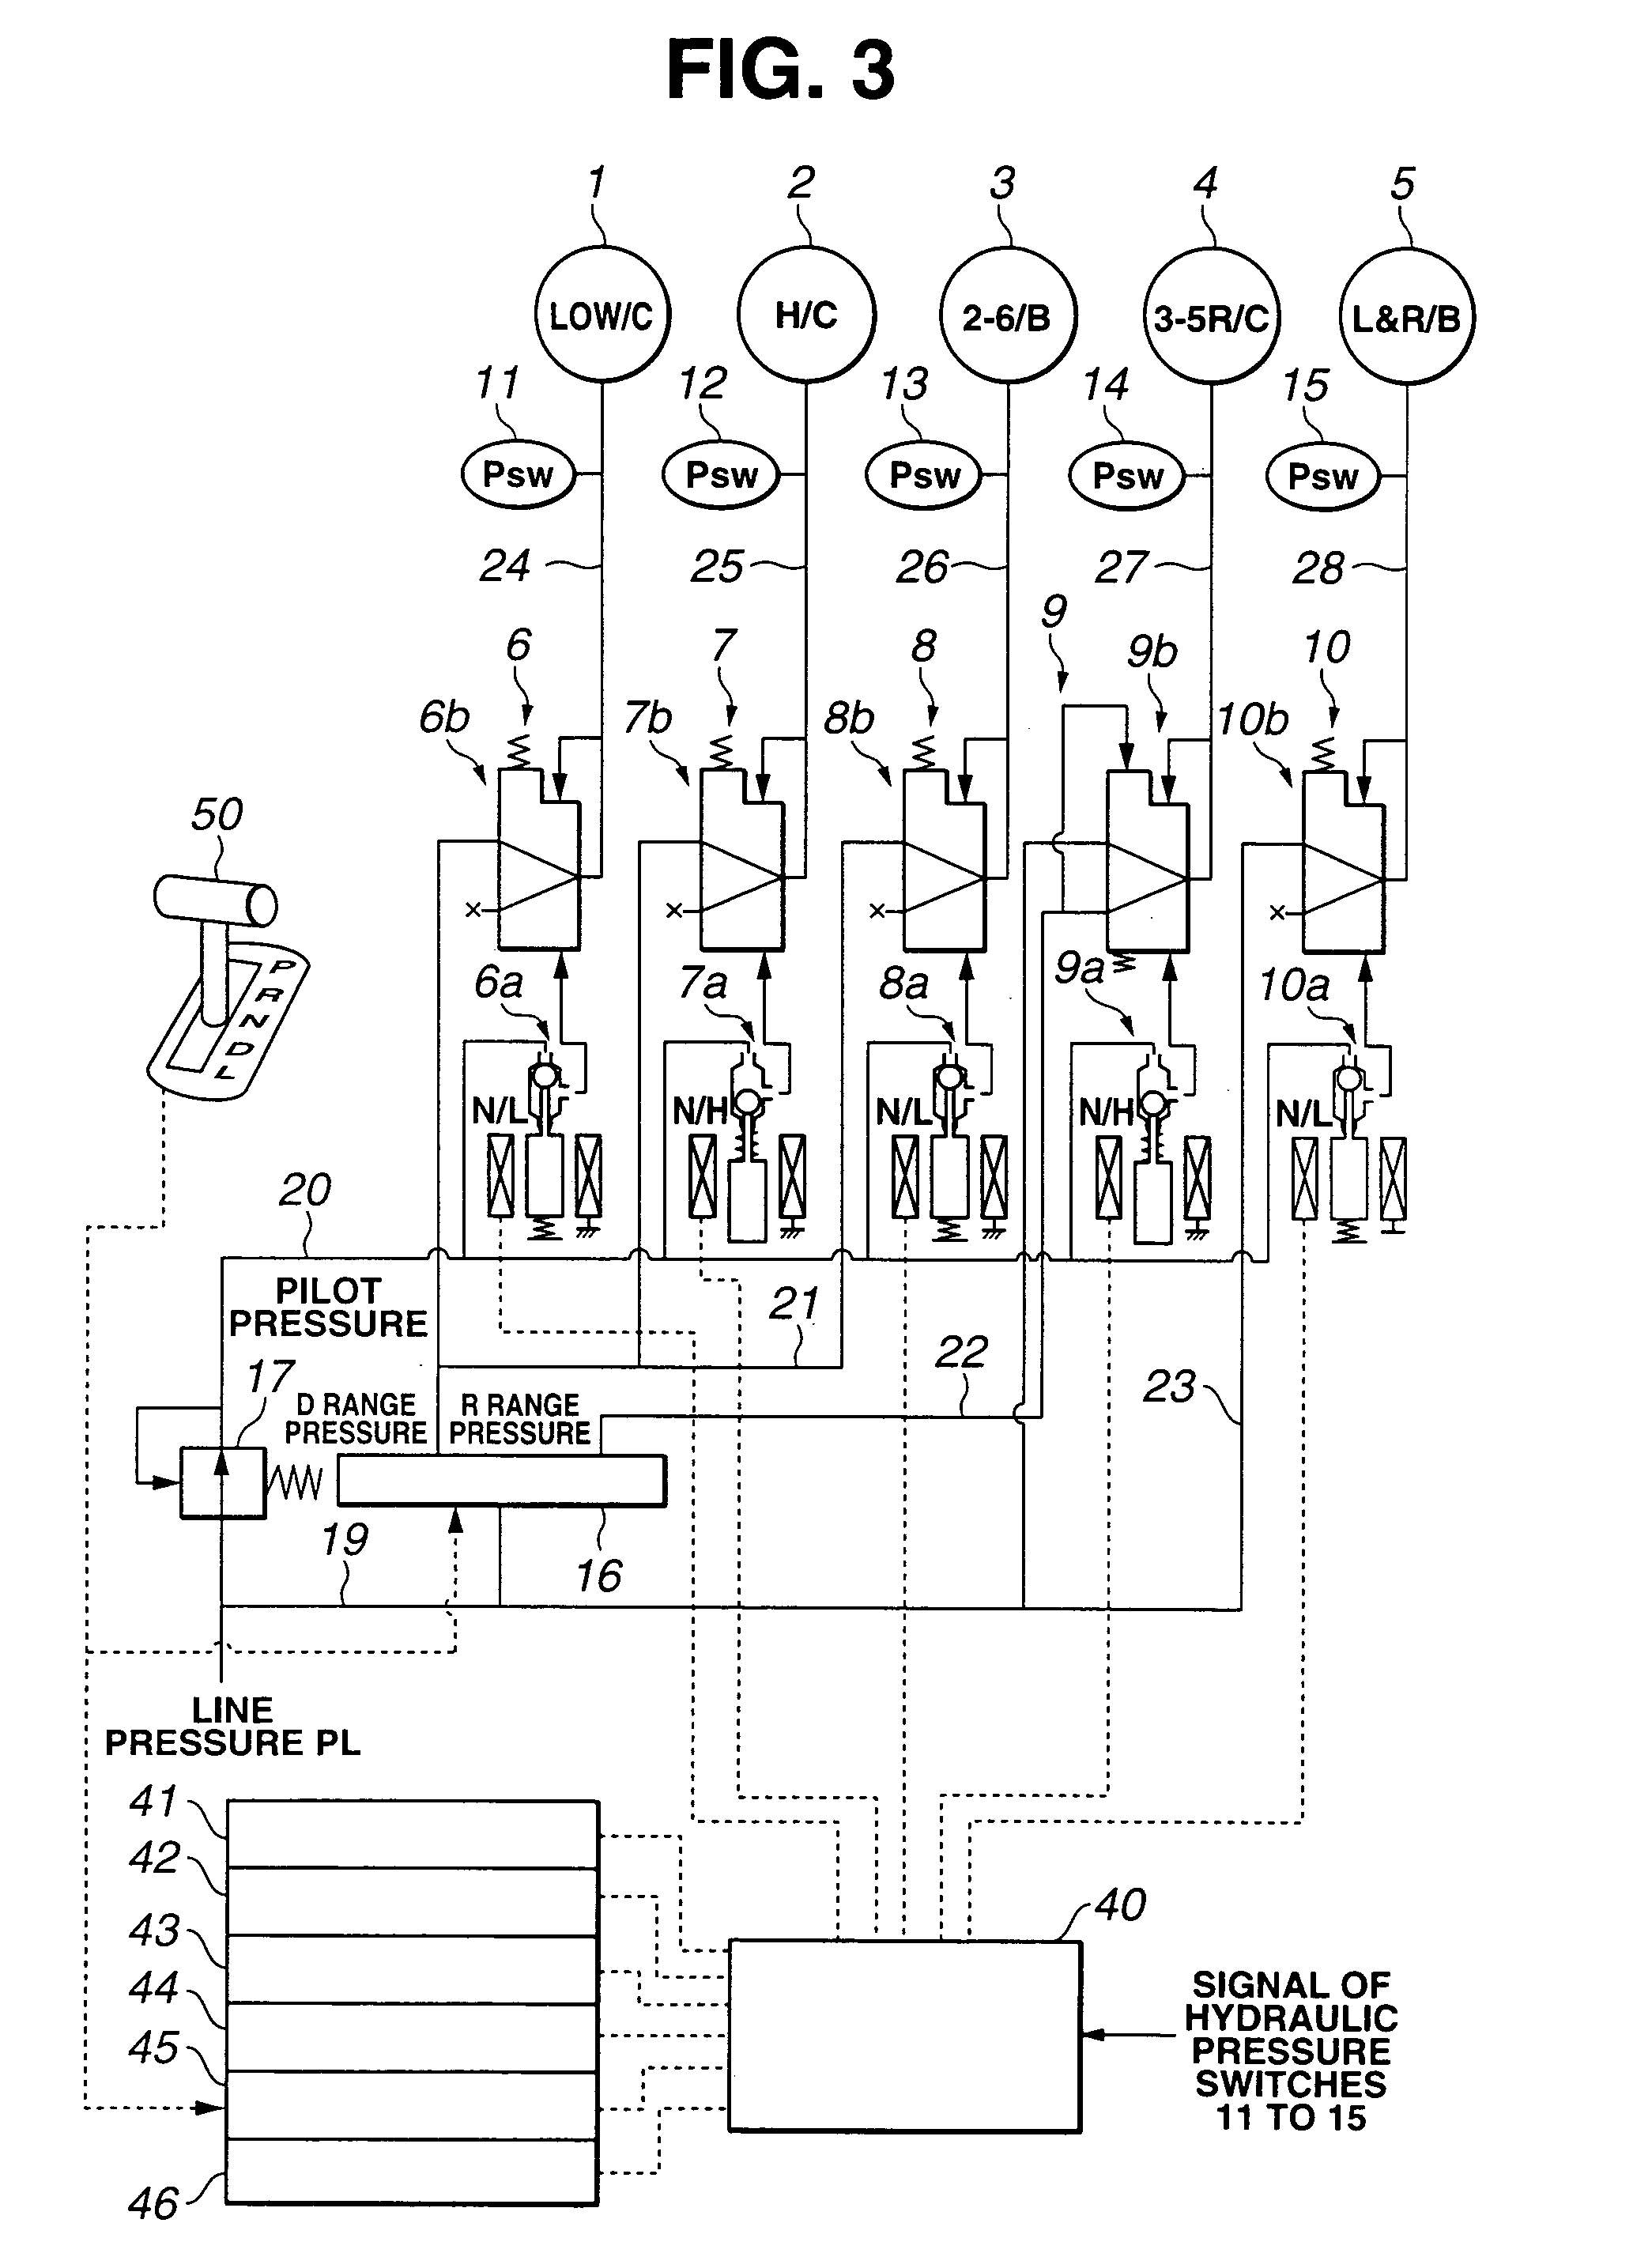 Shift control system of automatic transmission